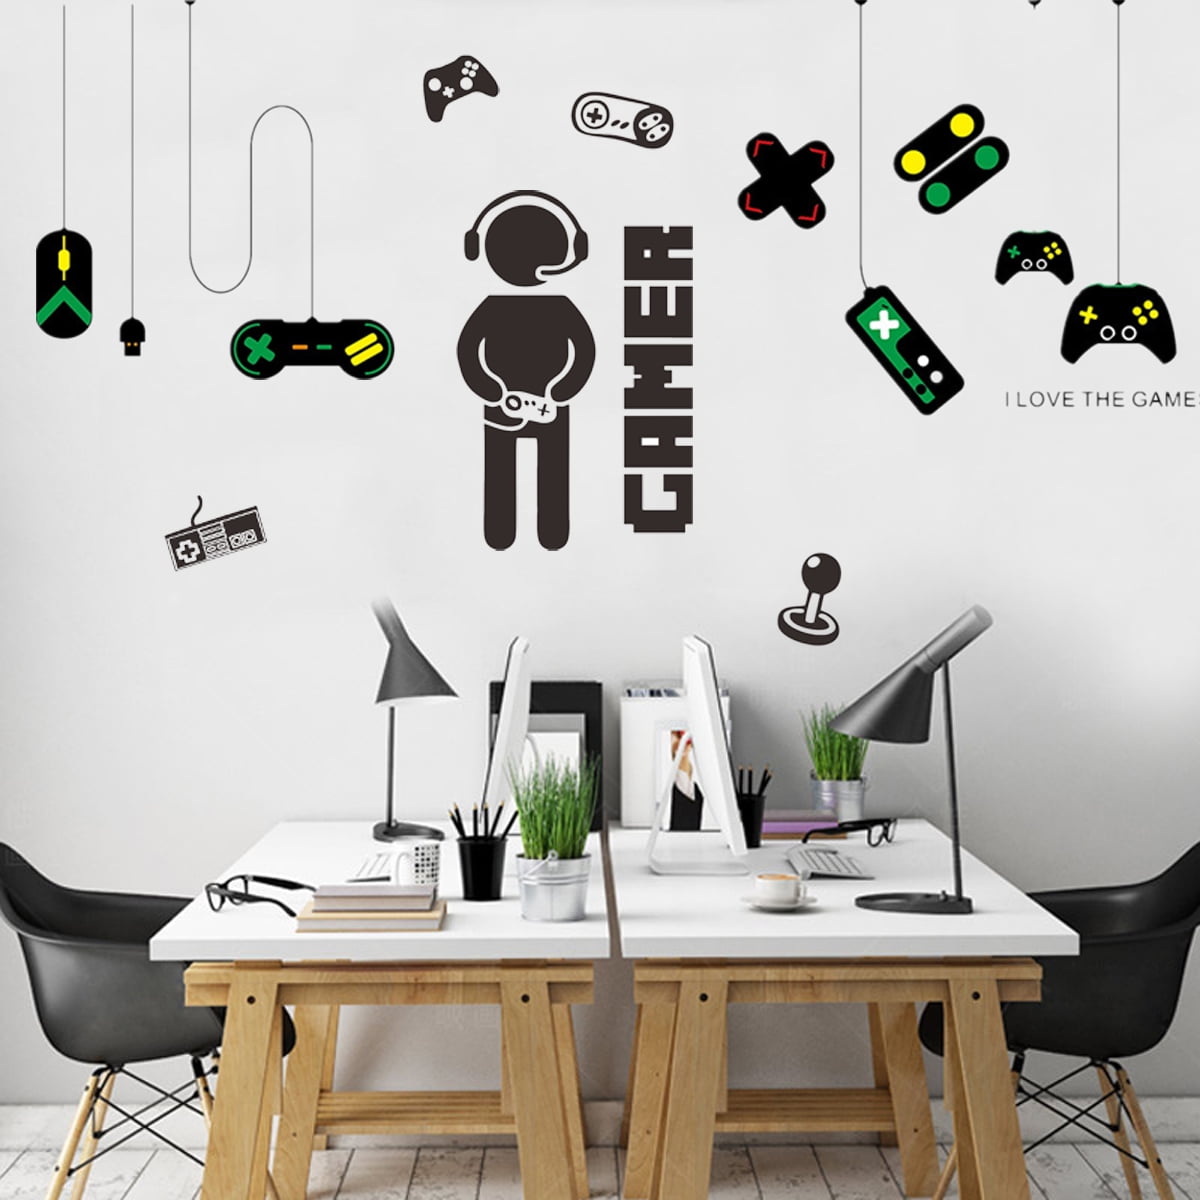 Video Game Decal Sticker and Art Decor for Living Room/Bedroom/Kitchen/Dining Room 4 2Pcs Set Gamer Wall Stickers Decal Boy Game Wall Decor